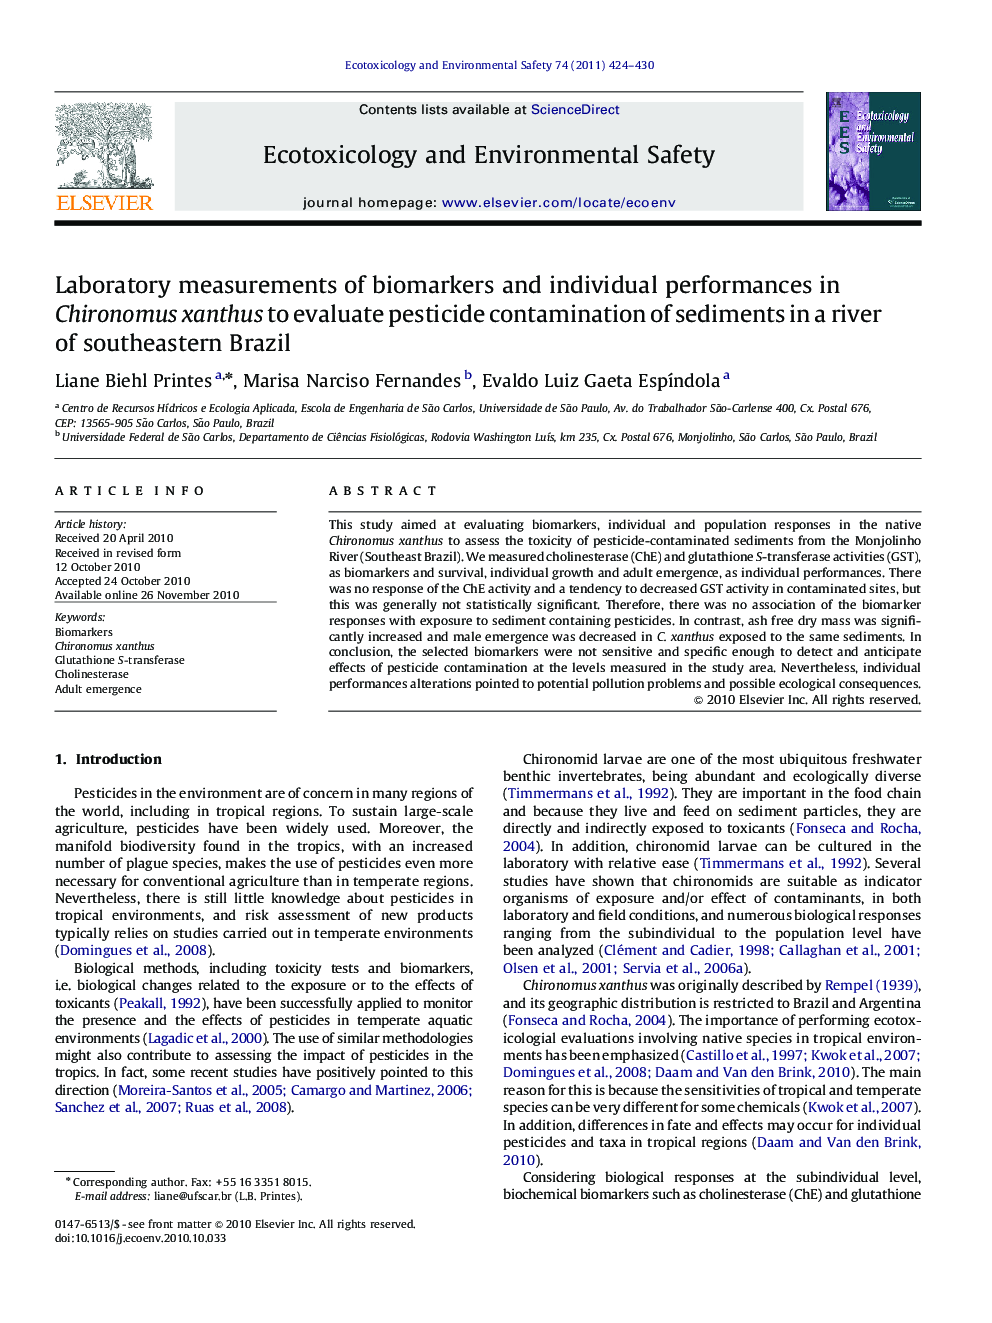 Laboratory measurements of biomarkers and individual performances in Chironomus xanthus to evaluate pesticide contamination of sediments in a river of southeastern Brazil